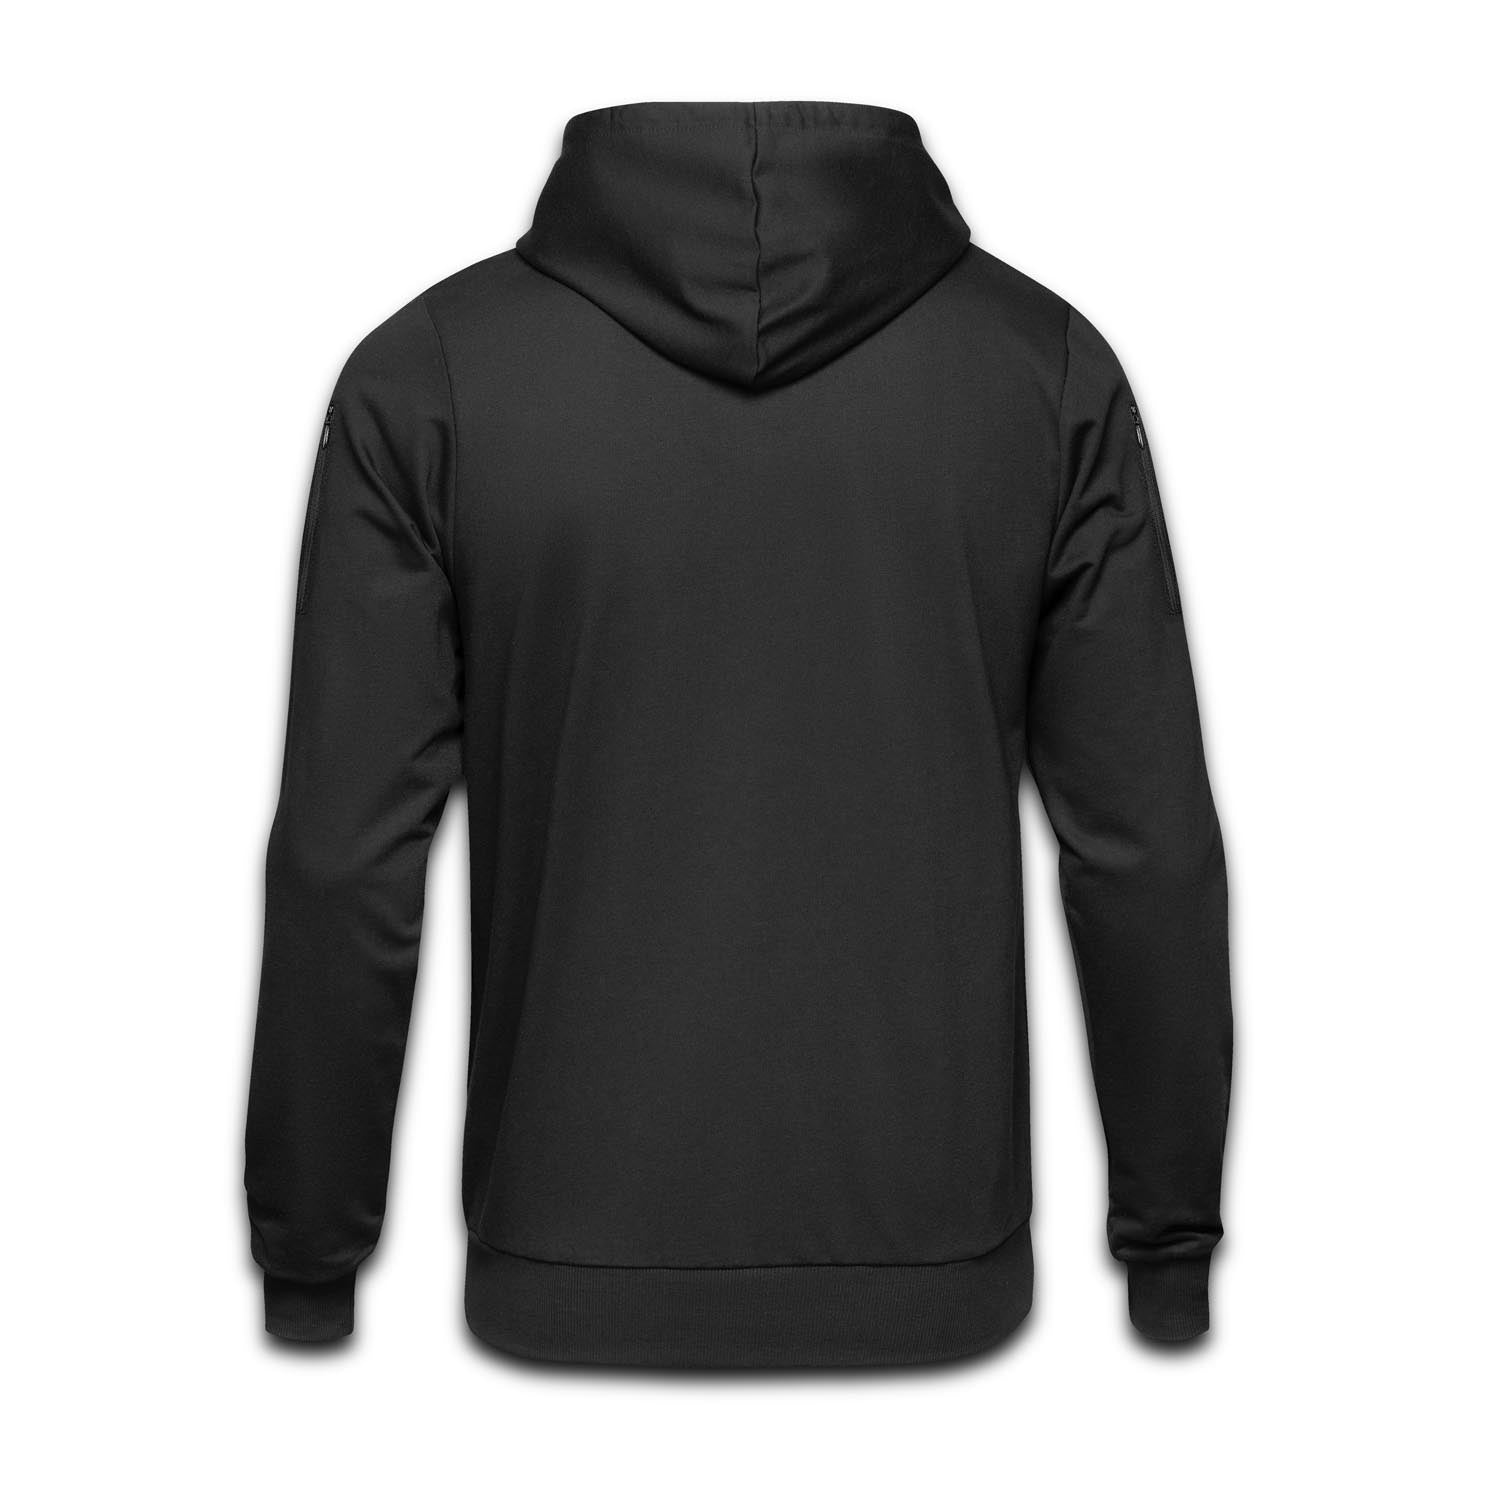 Concealed Carry Black Sweatshirt Hoodie with Kangaroo Pocket for Easy CCW Access